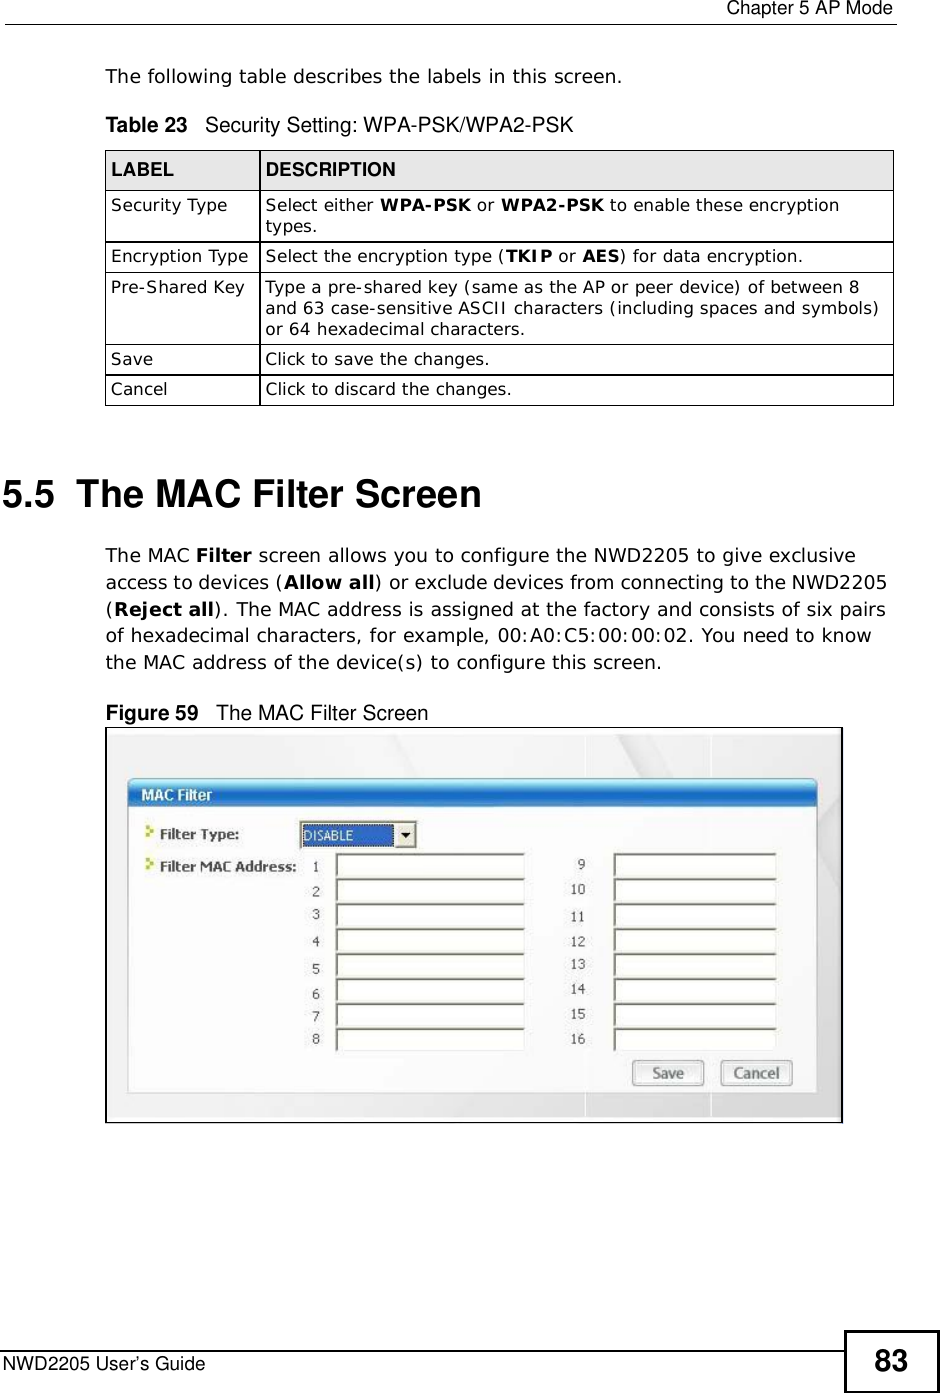  Chapter 5AP ModeNWD2205 User’s Guide 83The following table describes the labels in this screen. 5.5  The MAC Filter ScreenThe MAC Filter screen allows you to configure the NWD2205 to give exclusive access to devices (Allow all) or exclude devices from connecting to the NWD2205 (Reject all). The MAC address is assigned at the factory and consists of six pairs of hexadecimal characters, for example, 00:A0:C5:00:00:02. You need to know the MAC address of the device(s) to configure this screen.Figure 59   The MAC Filter Screen Table 23   Security Setting: WPA-PSK/WPA2-PSKLABEL DESCRIPTIONSecurity TypeSelect either WPA-PSK or WPA2-PSK to enable these encryption types.Encryption TypeSelect the encryption type (TKIP or AES) for data encryption.Pre-Shared KeyType a pre-shared key (same as the AP or peer device) of between 8 and 63 case-sensitive ASCII characters (including spaces and symbols) or 64 hexadecimal characters.SaveClickto save the changes.CancelClickto discard the changes.